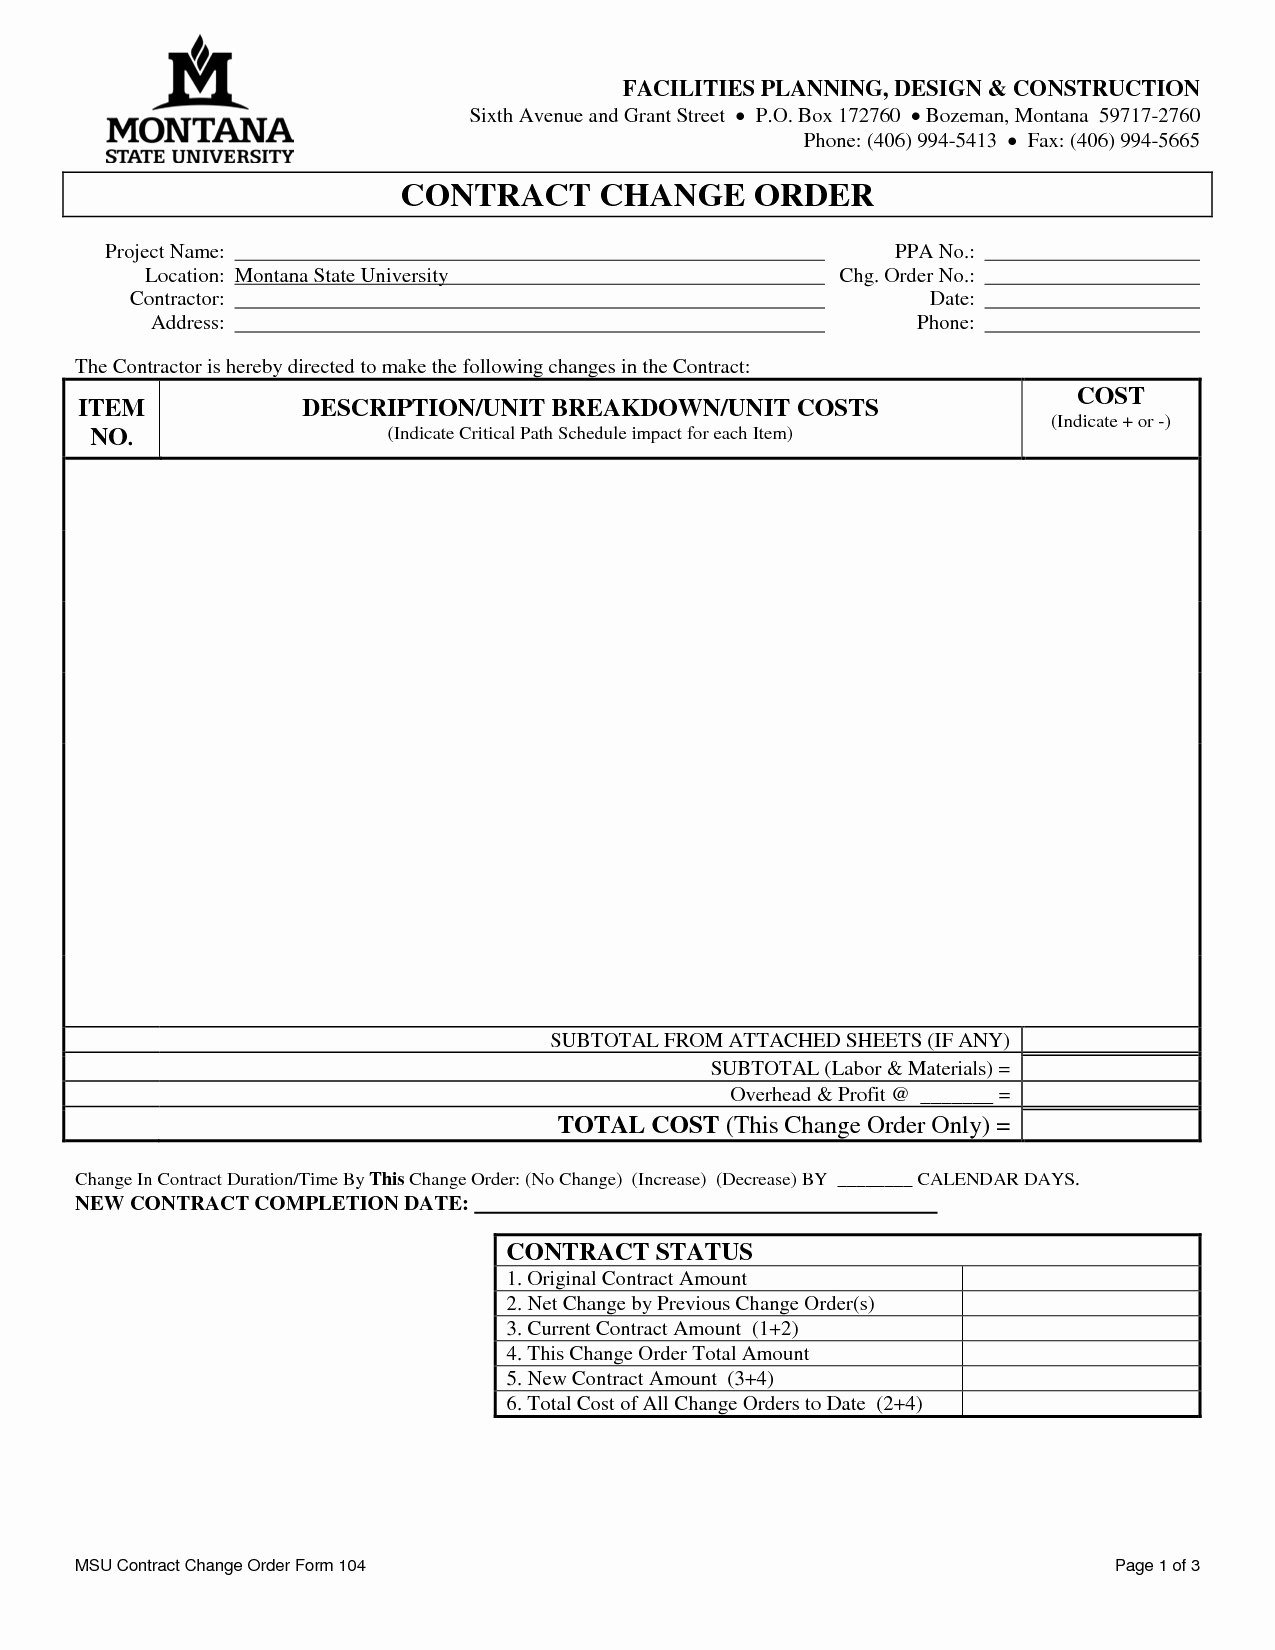 Change order Template Excel Fresh Free Construction Change order form Pdf by Ckm